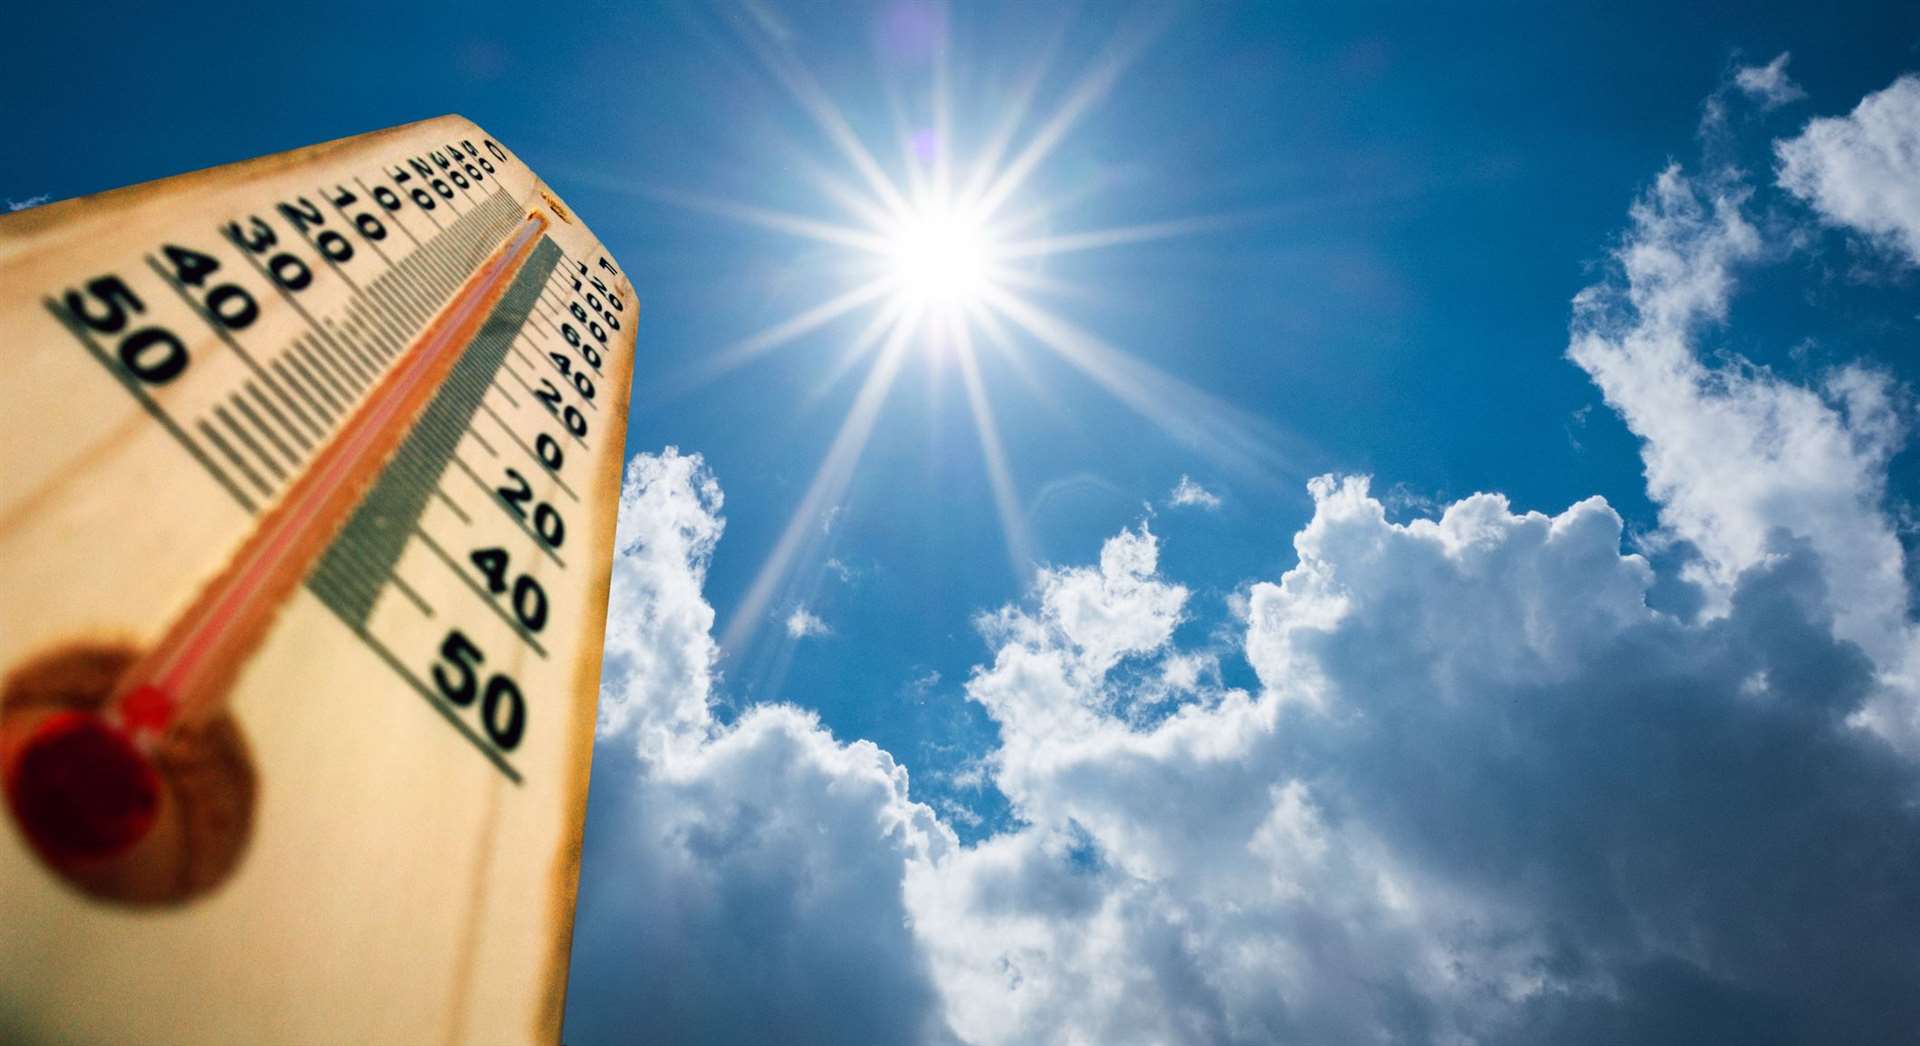 The heat can affect anyone but some people may be more at risk.